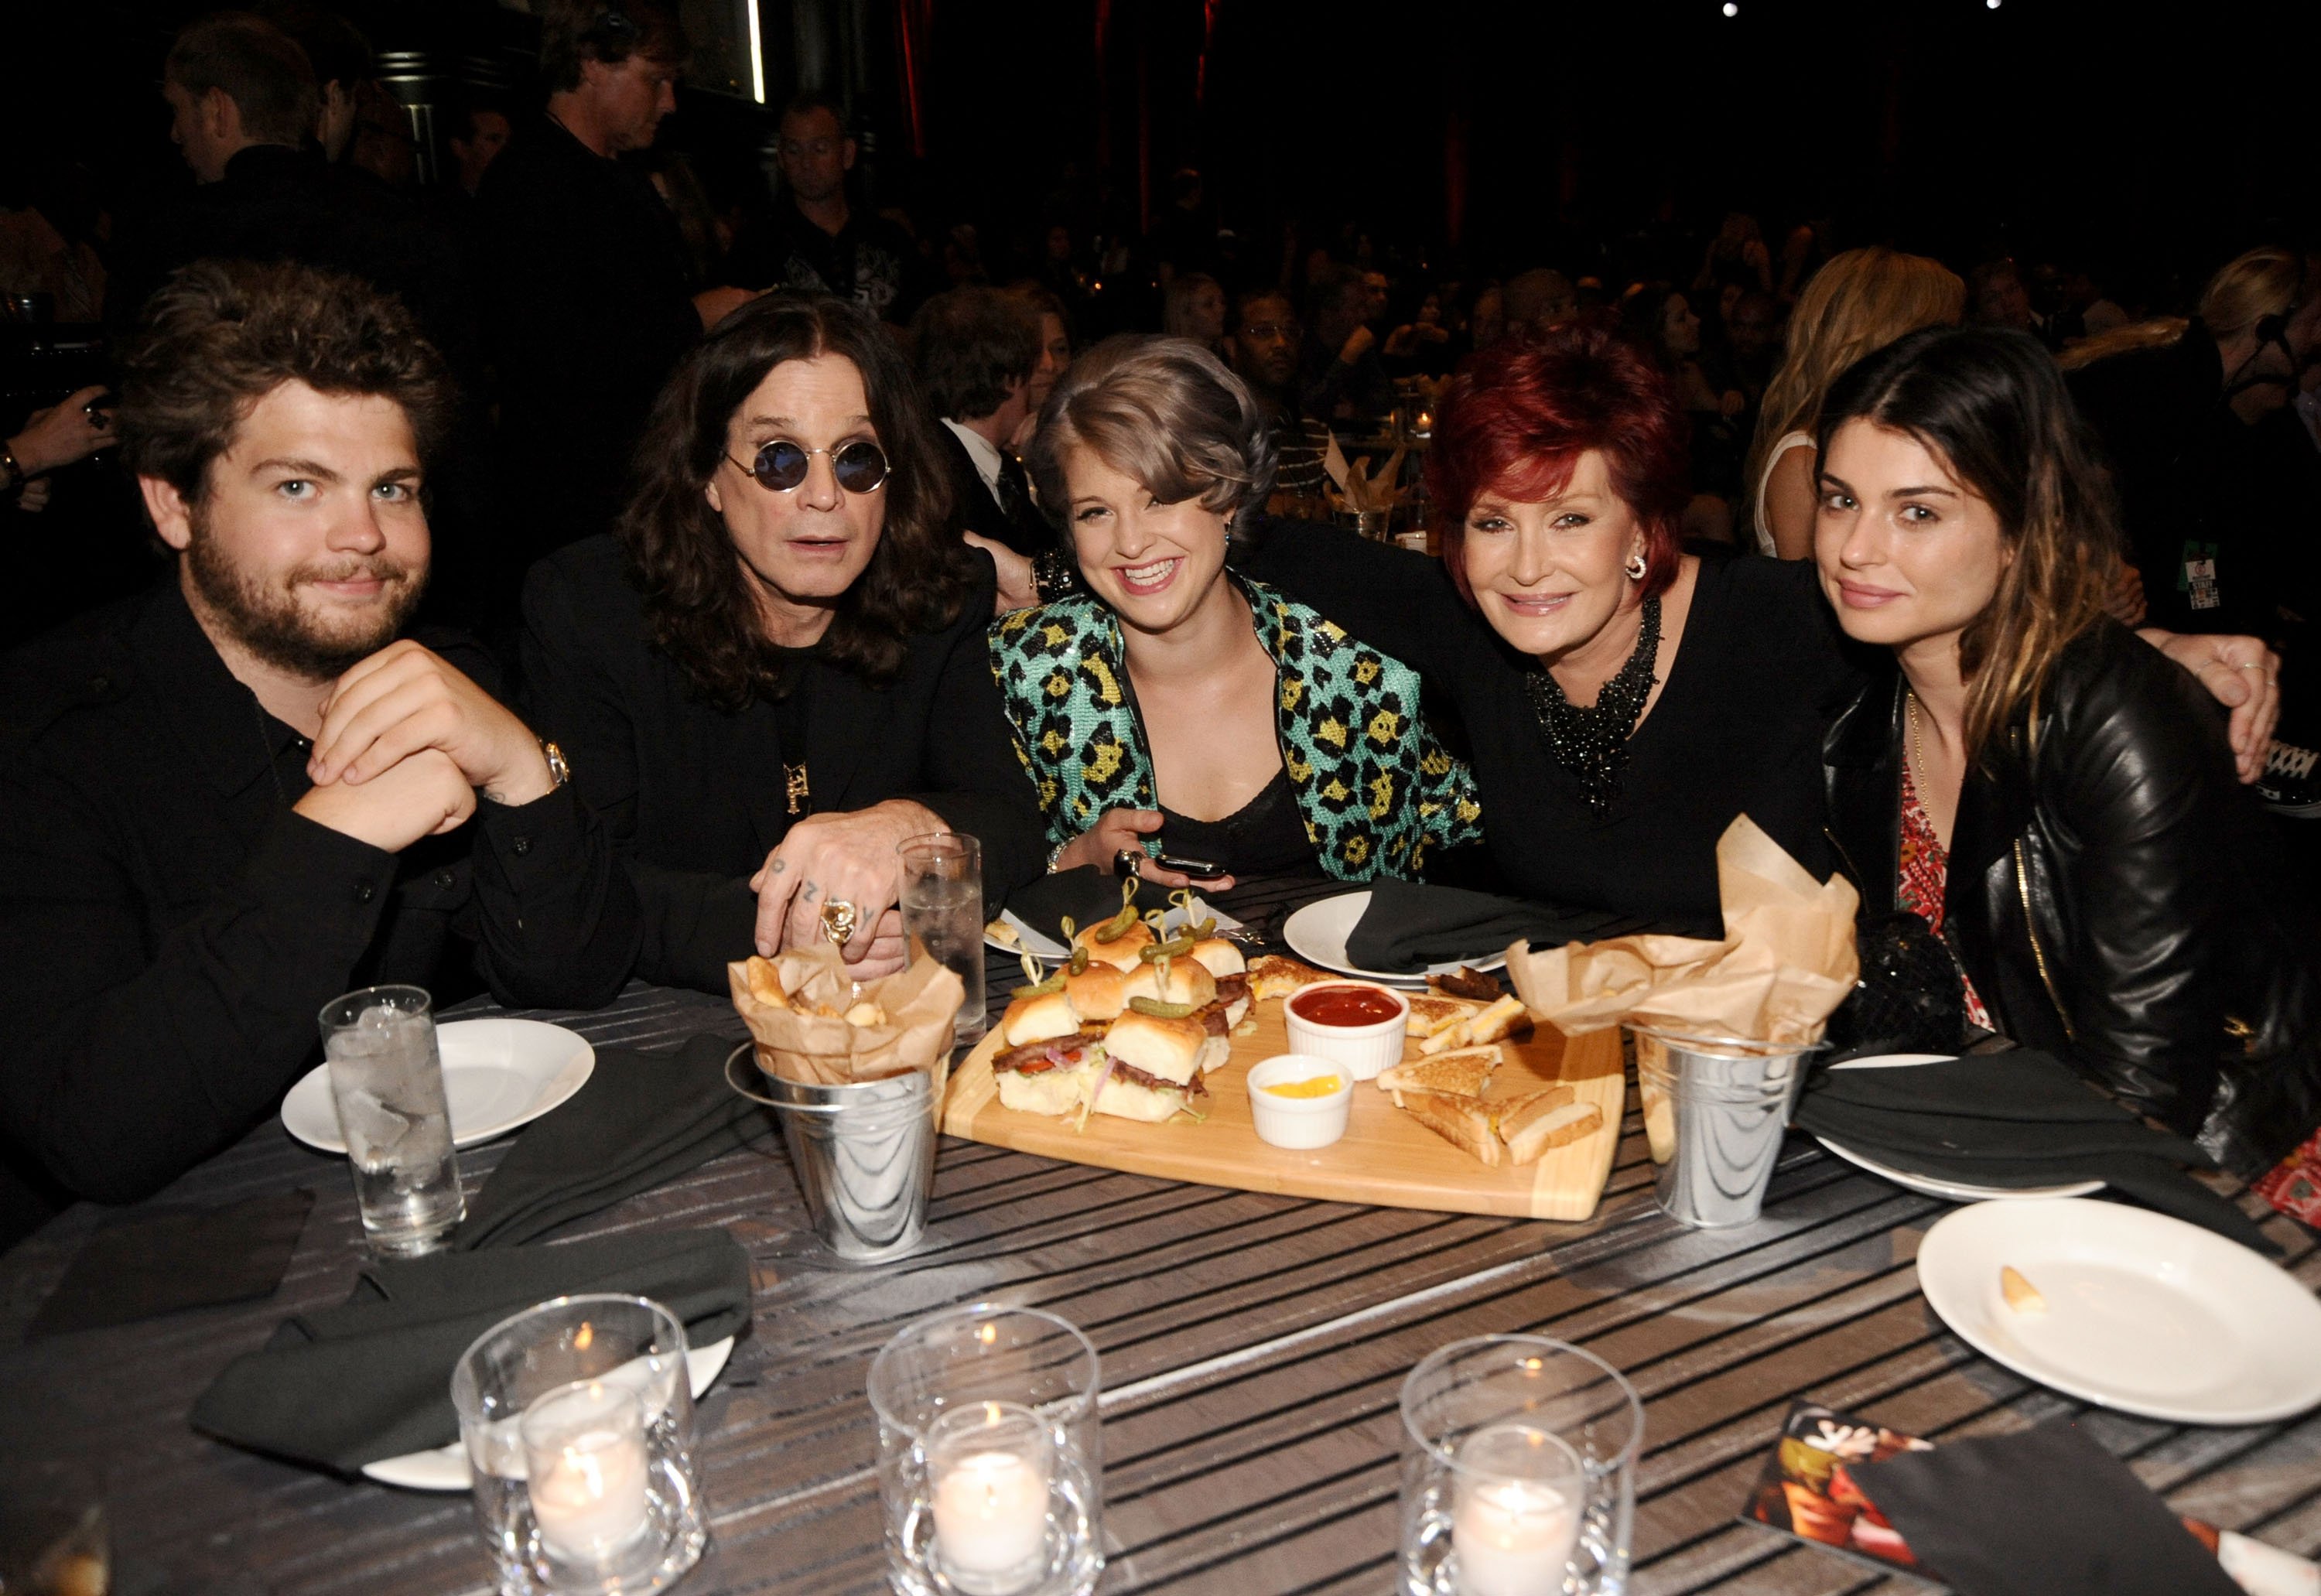 Pictured: (From left to right) Jack Osbourne, Ozzy Osbourne, Kelly Osbourne, Sharon Osbourne and Aimee Osbourne during Spike TV's 4th Annual "Guys Choice Awards" at Sony Studios on June 5, 2010 in Los Angeles, California. | Source: Getty Images